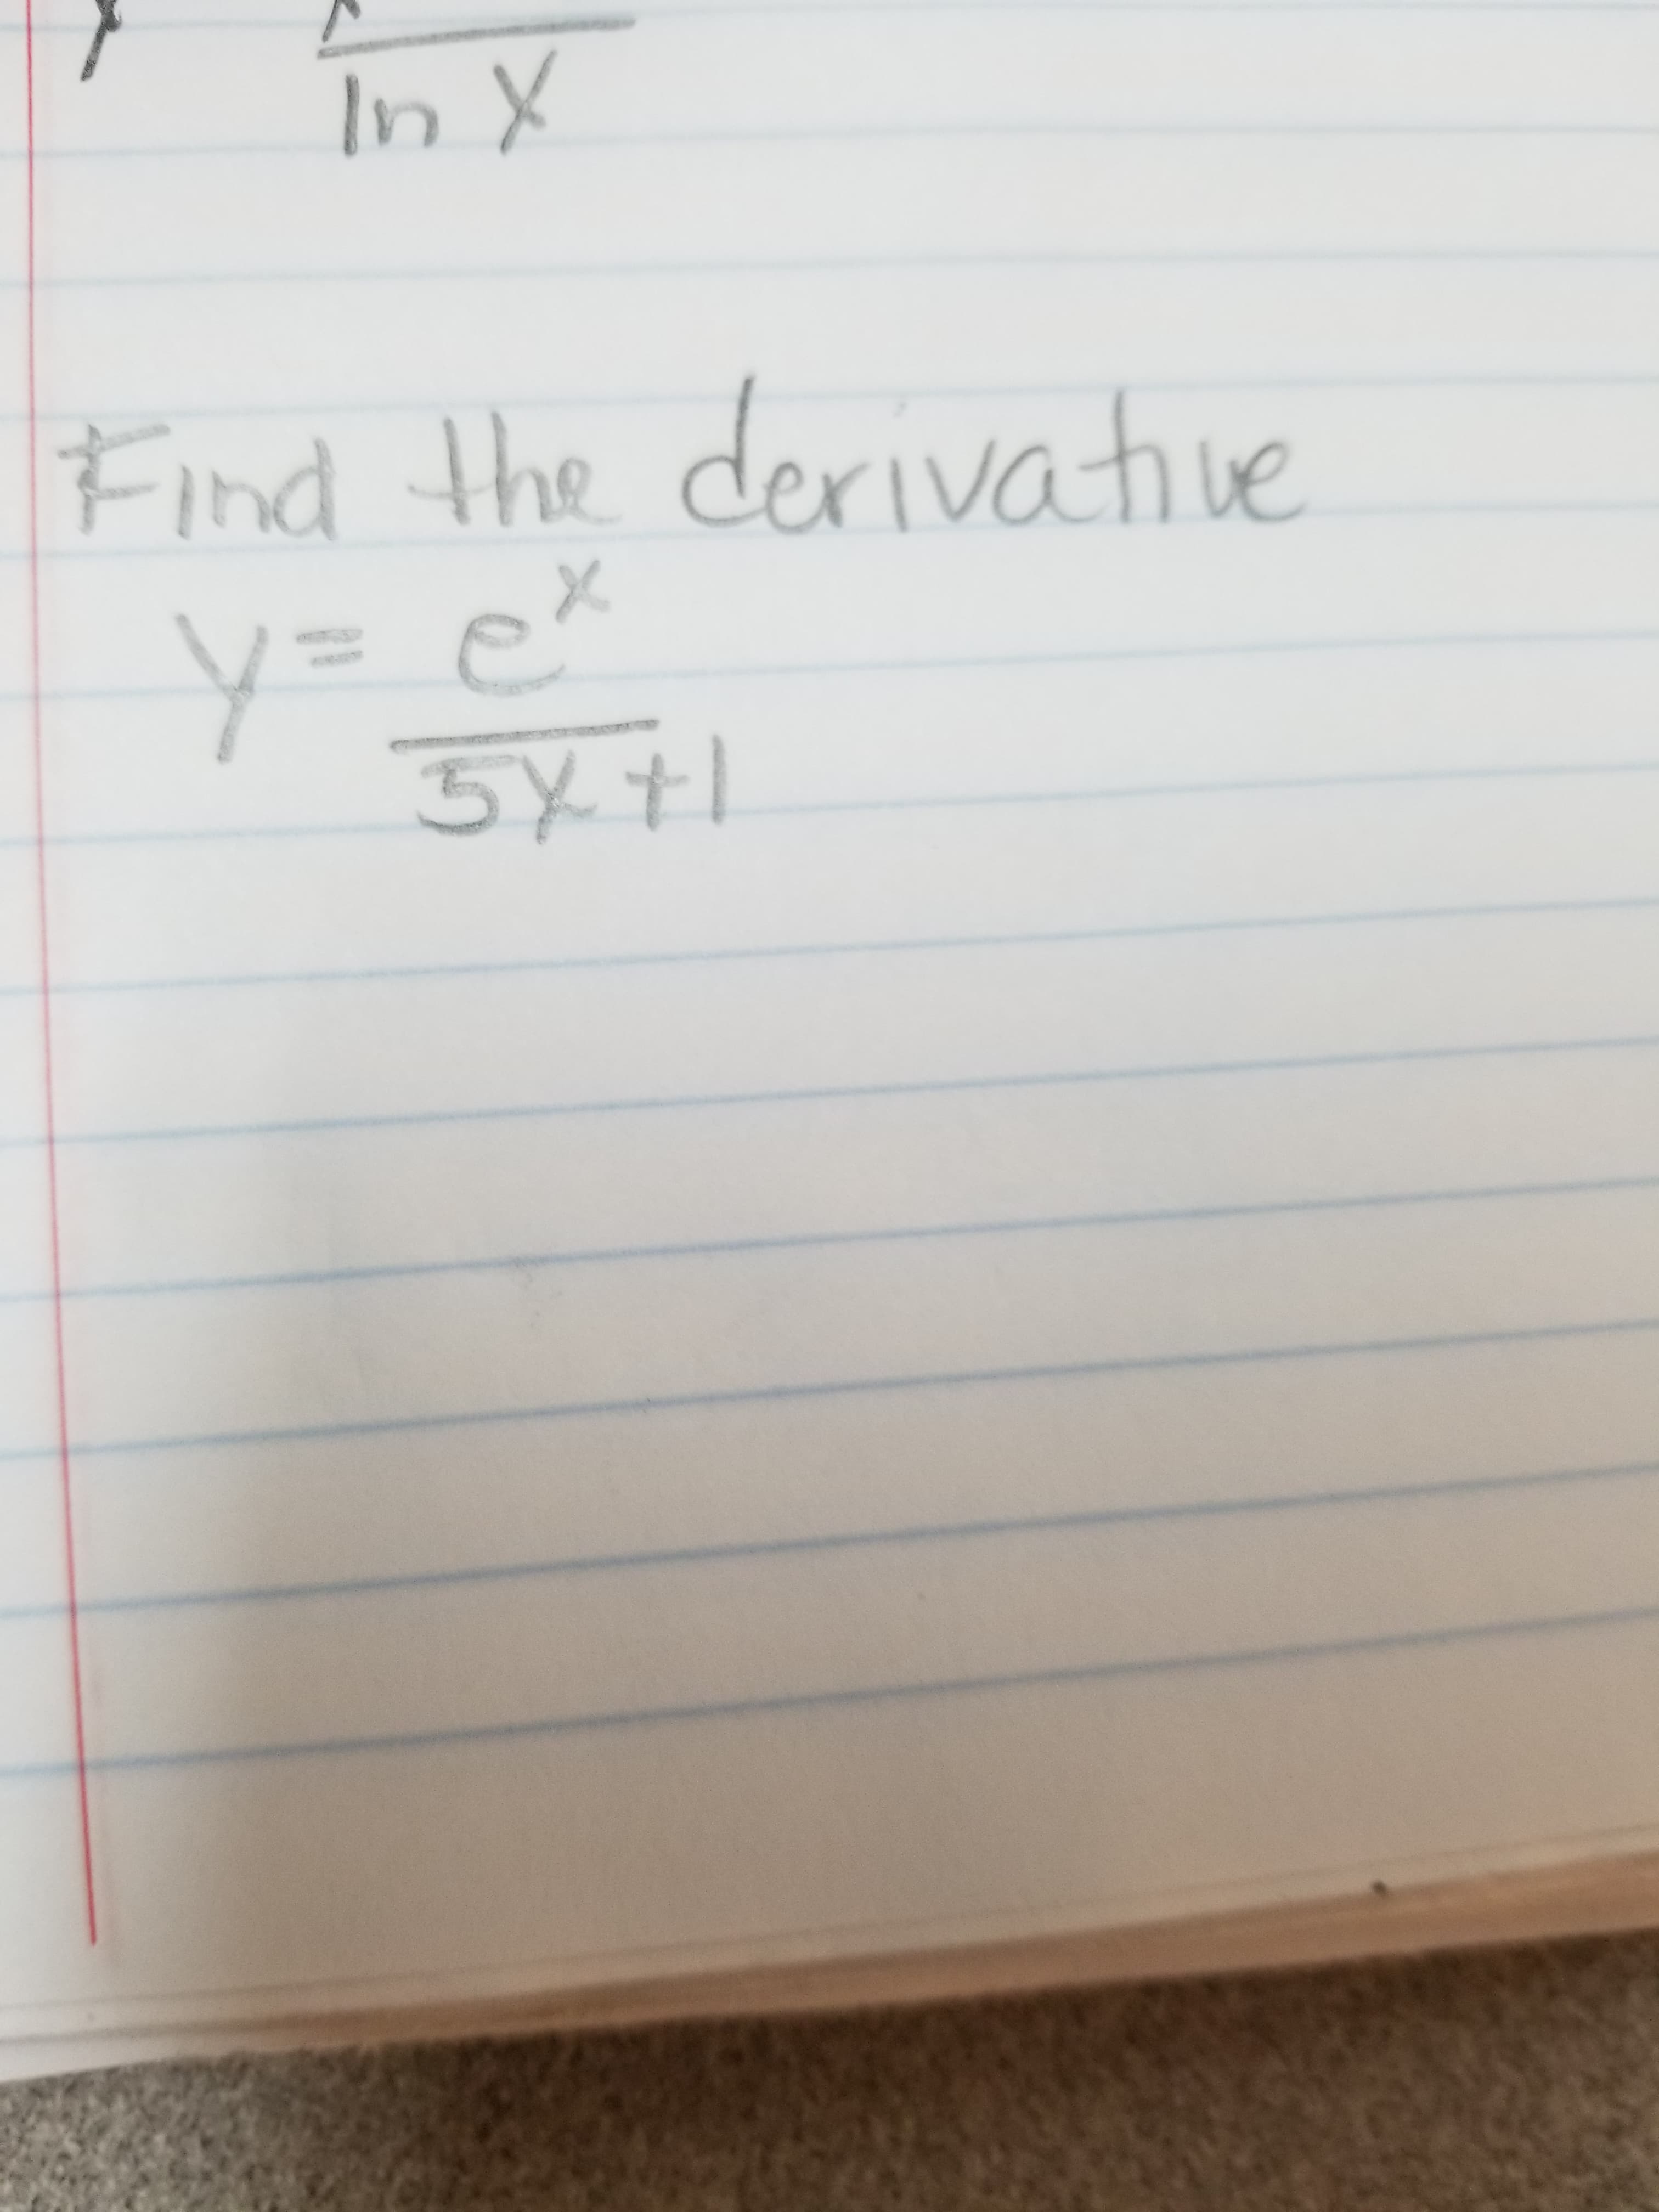 In X
Find the derivahve
5Yt
